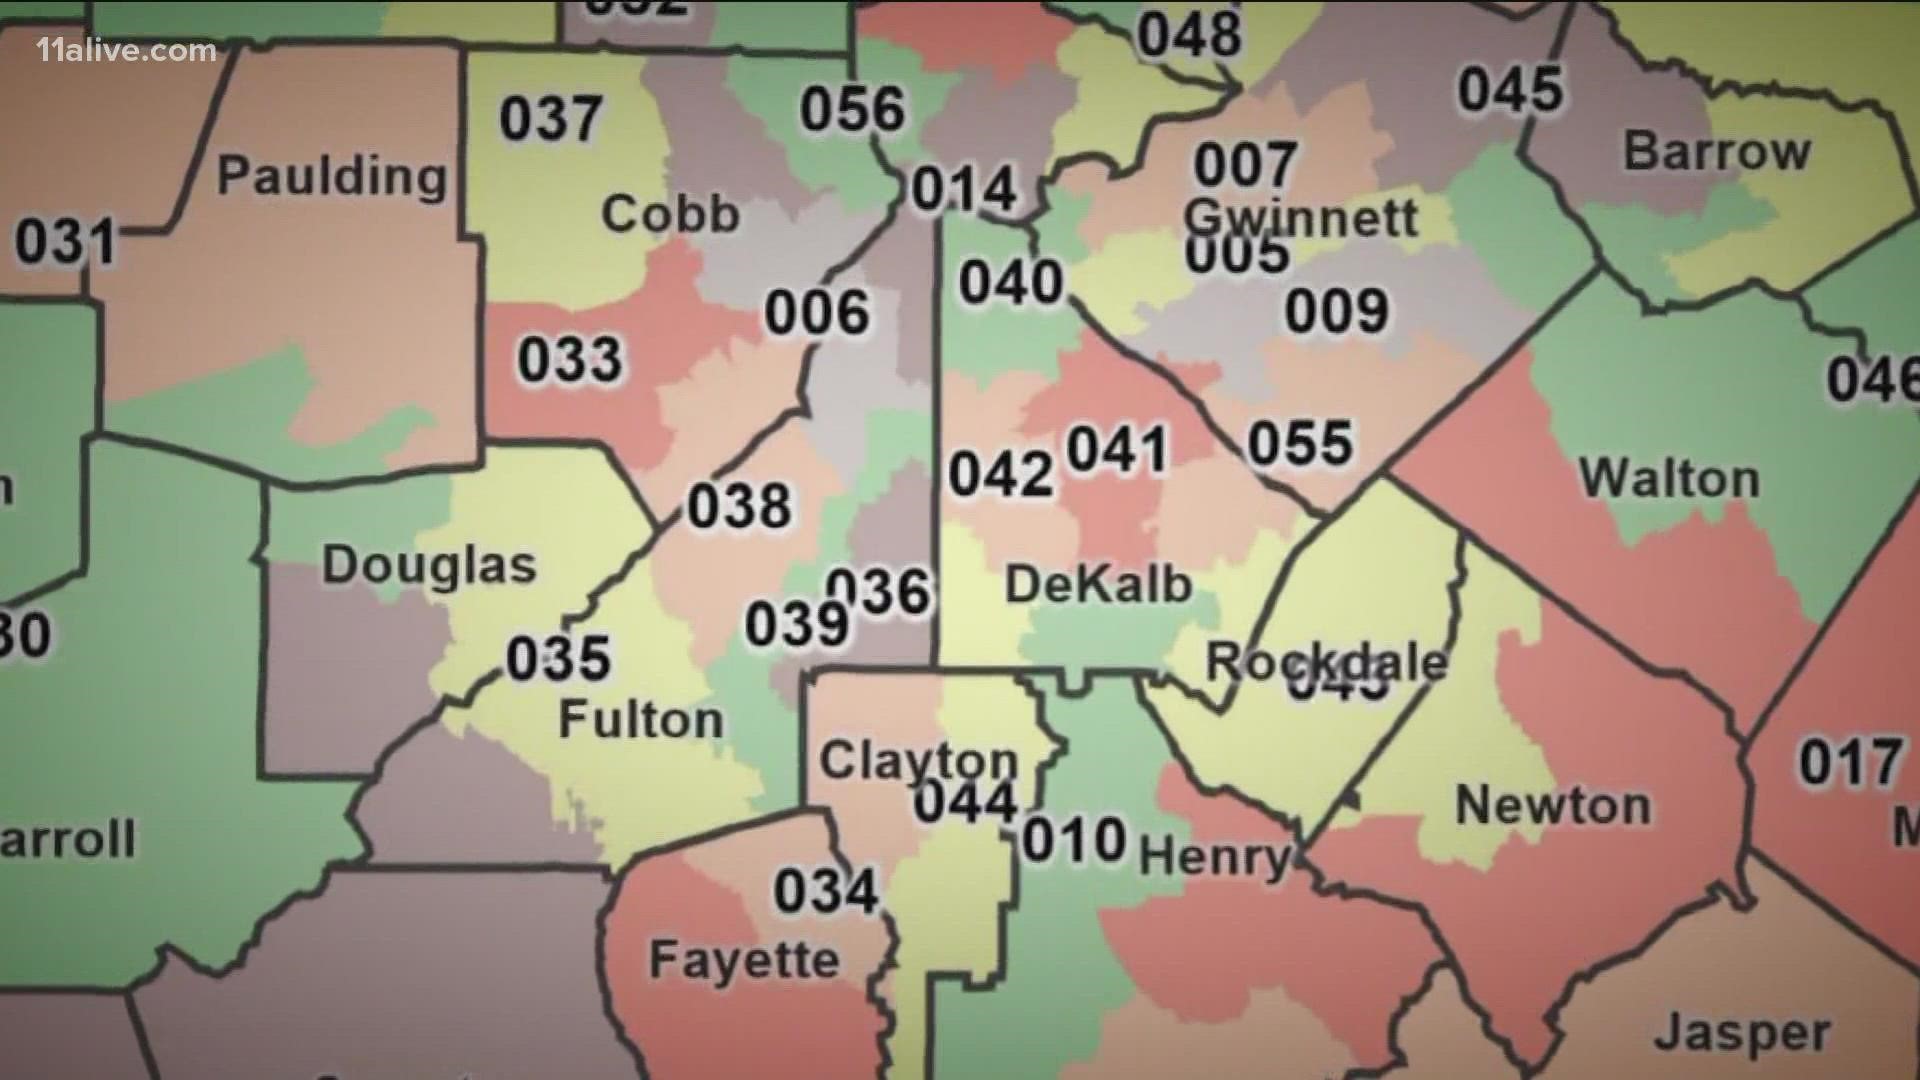 Georgia lawmakers met for a special session to redraw district maps based on the 2020 census. It could affect who's on your ballot in the future.